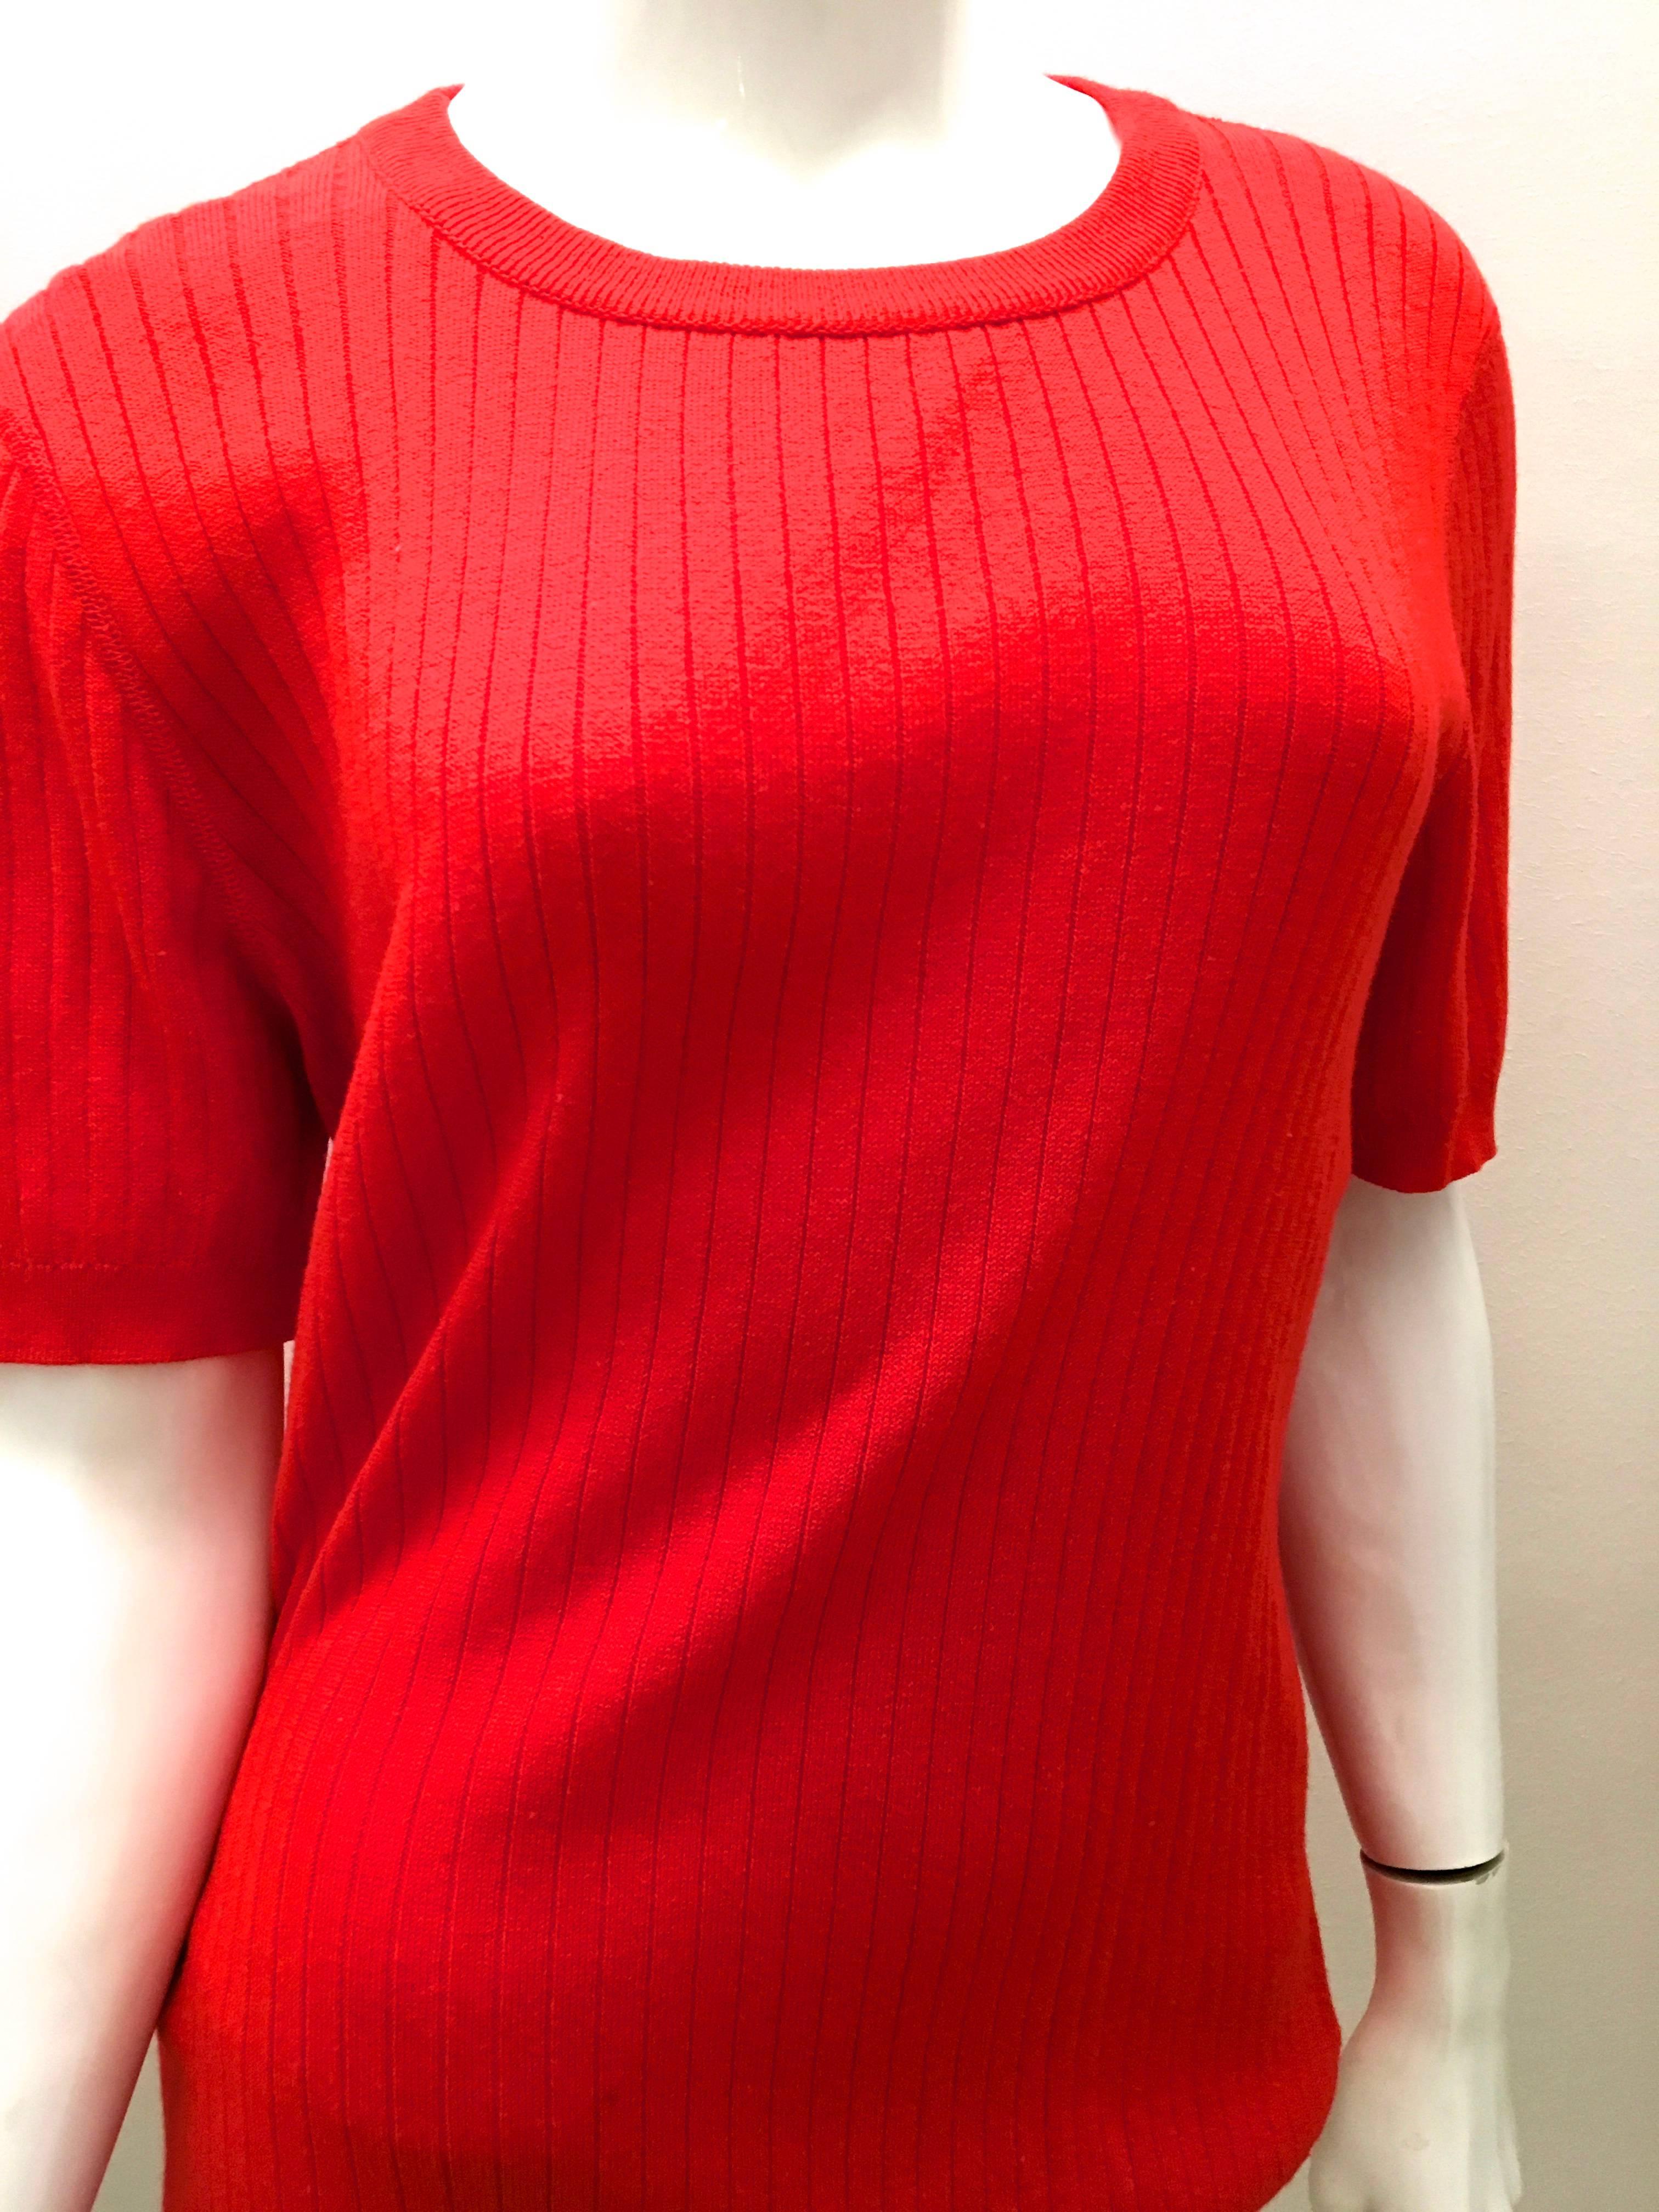 Rare Courreges Red Cardigan Sweater Set - 1970's For Sale 6